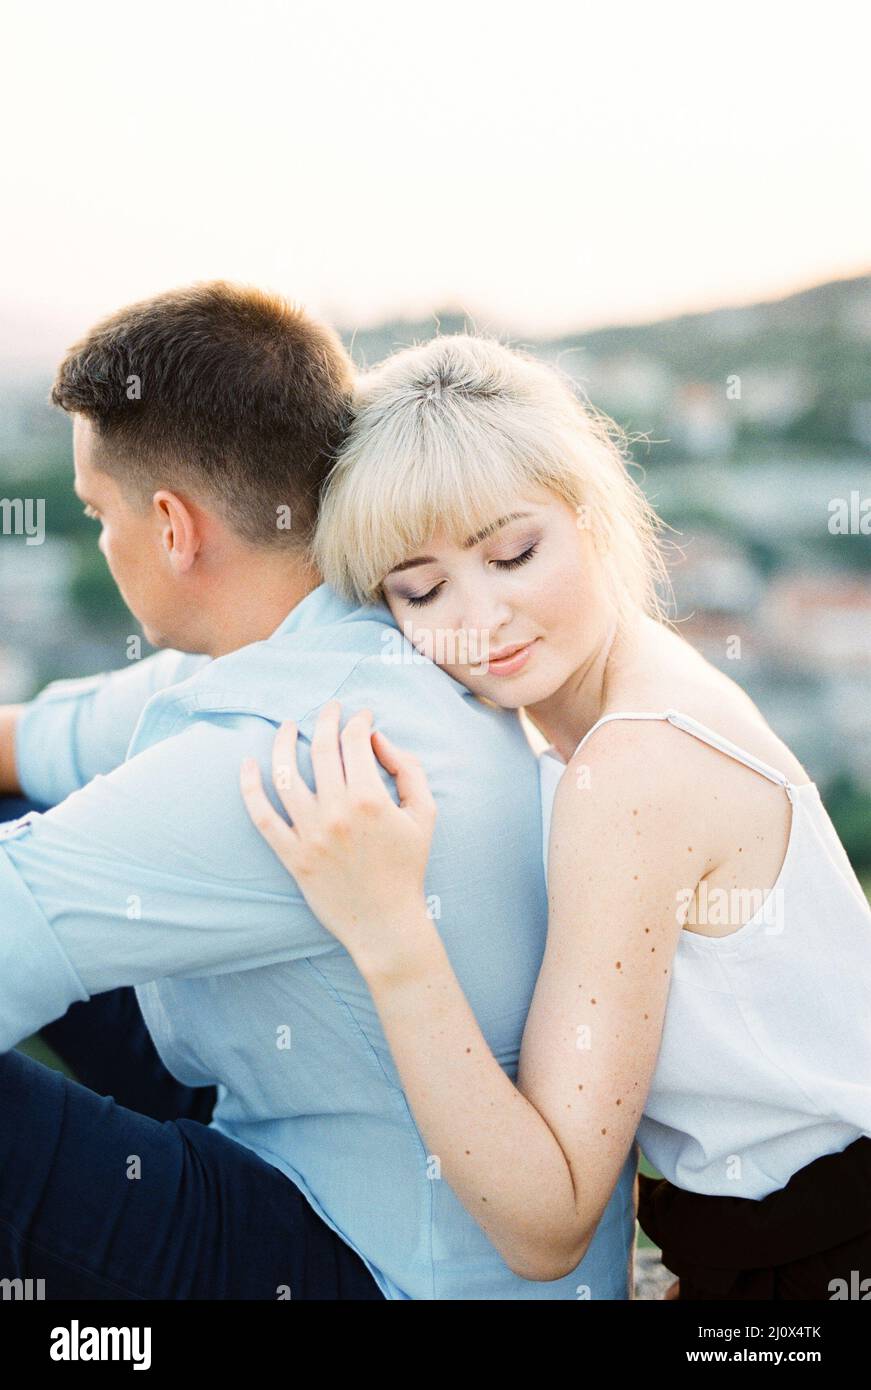 Woman hugs a man from behind with her head on his shoulder. Portrait Stock Photo